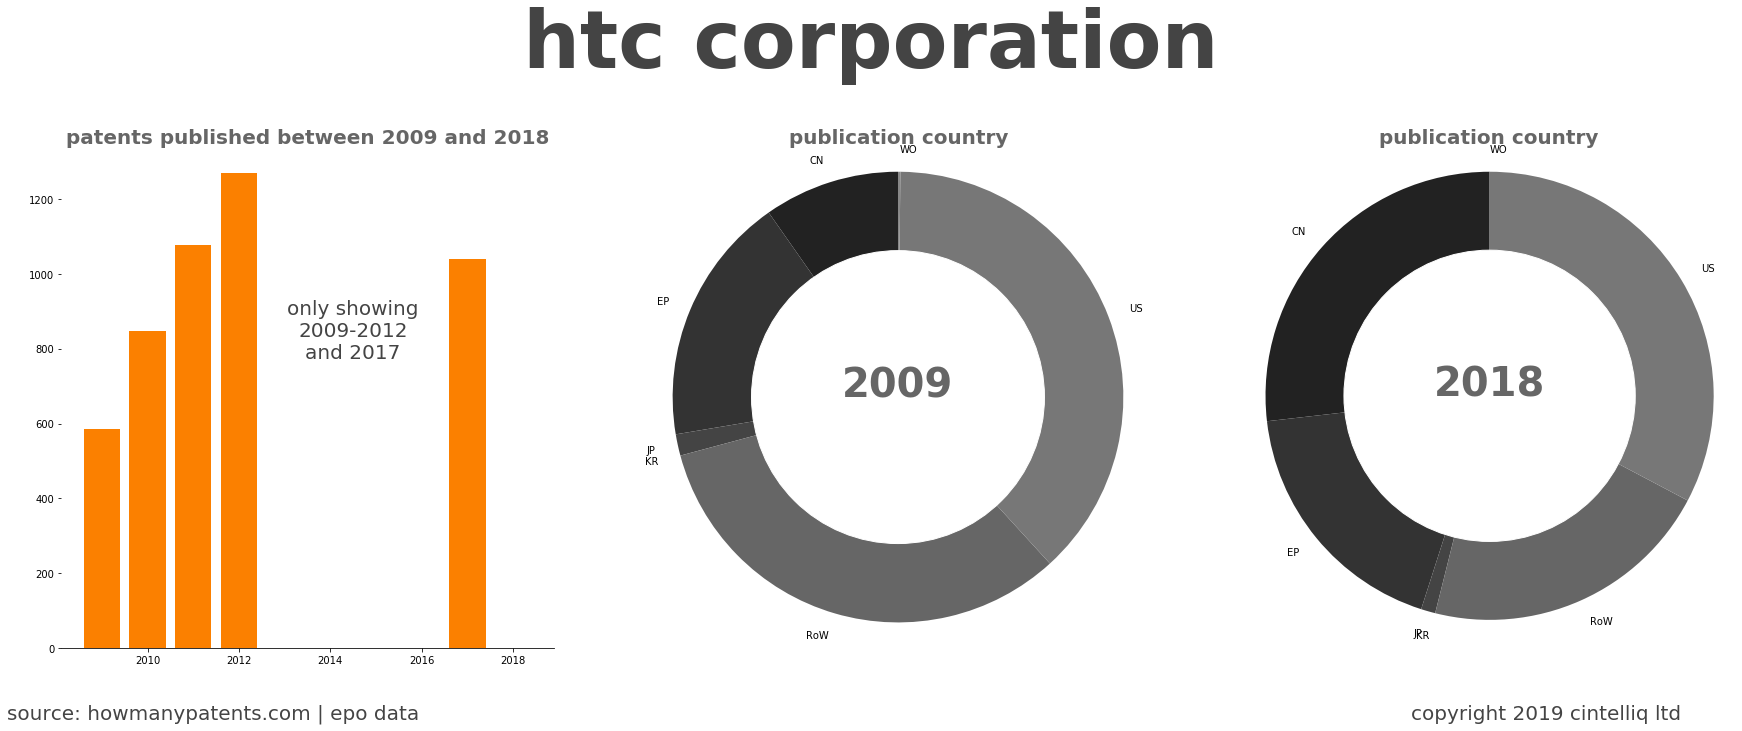 summary of patents for Htc Corporation